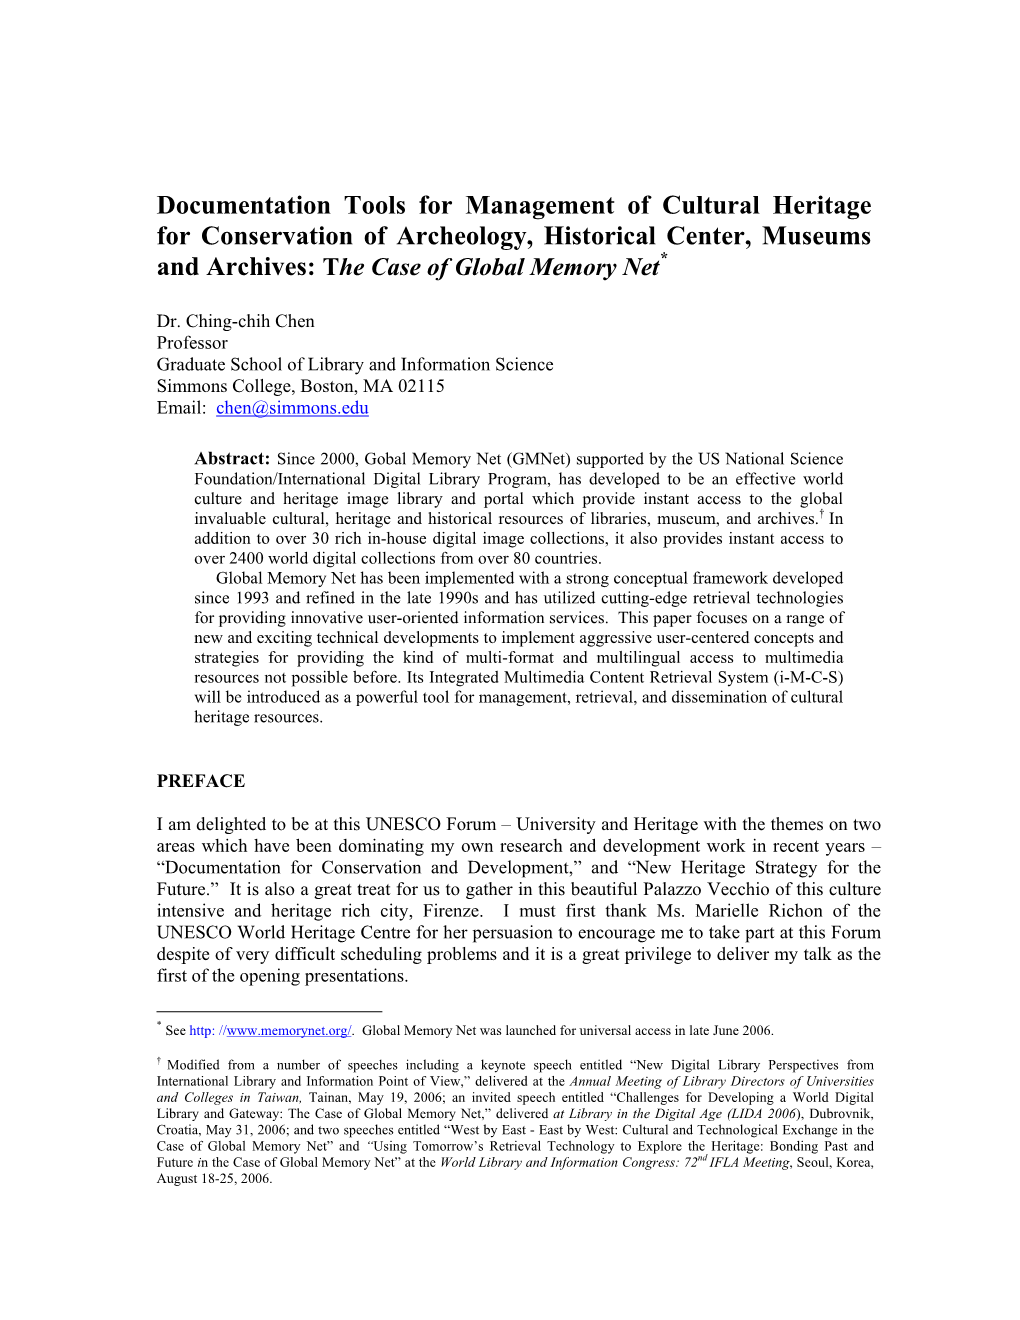 Documentation Tools for Management of Cultural Heritage for Conservation of Archeology, Historical Center, Museums and Archives: the Case of Global Memory Net*